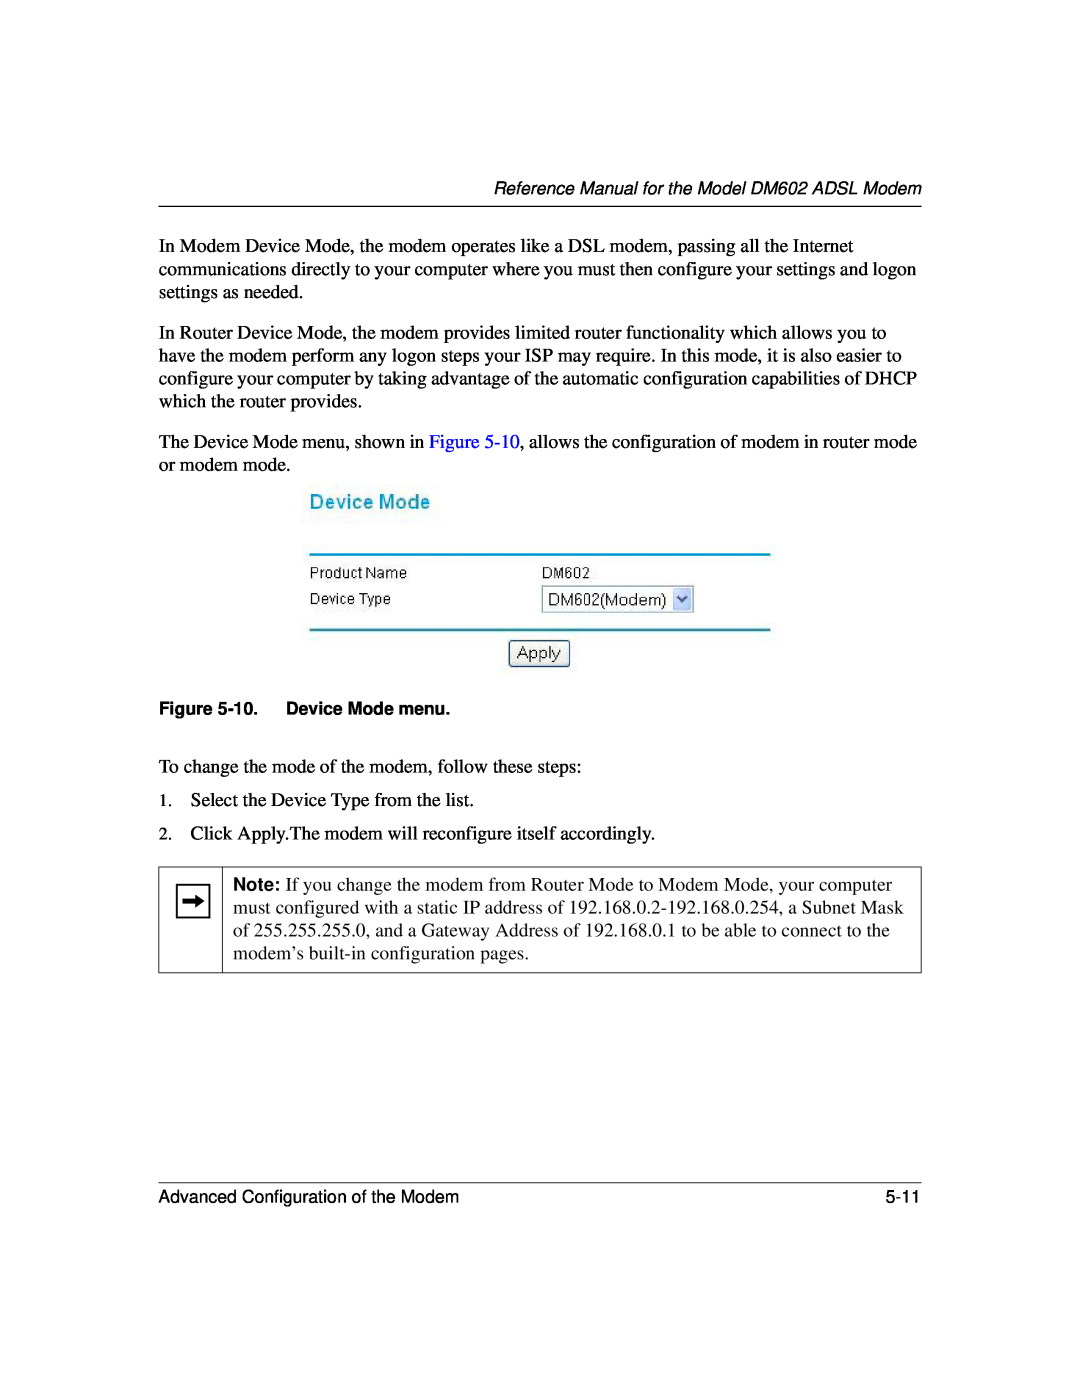 NETGEAR DM602 manual To change the mode of the modem, follow these steps 